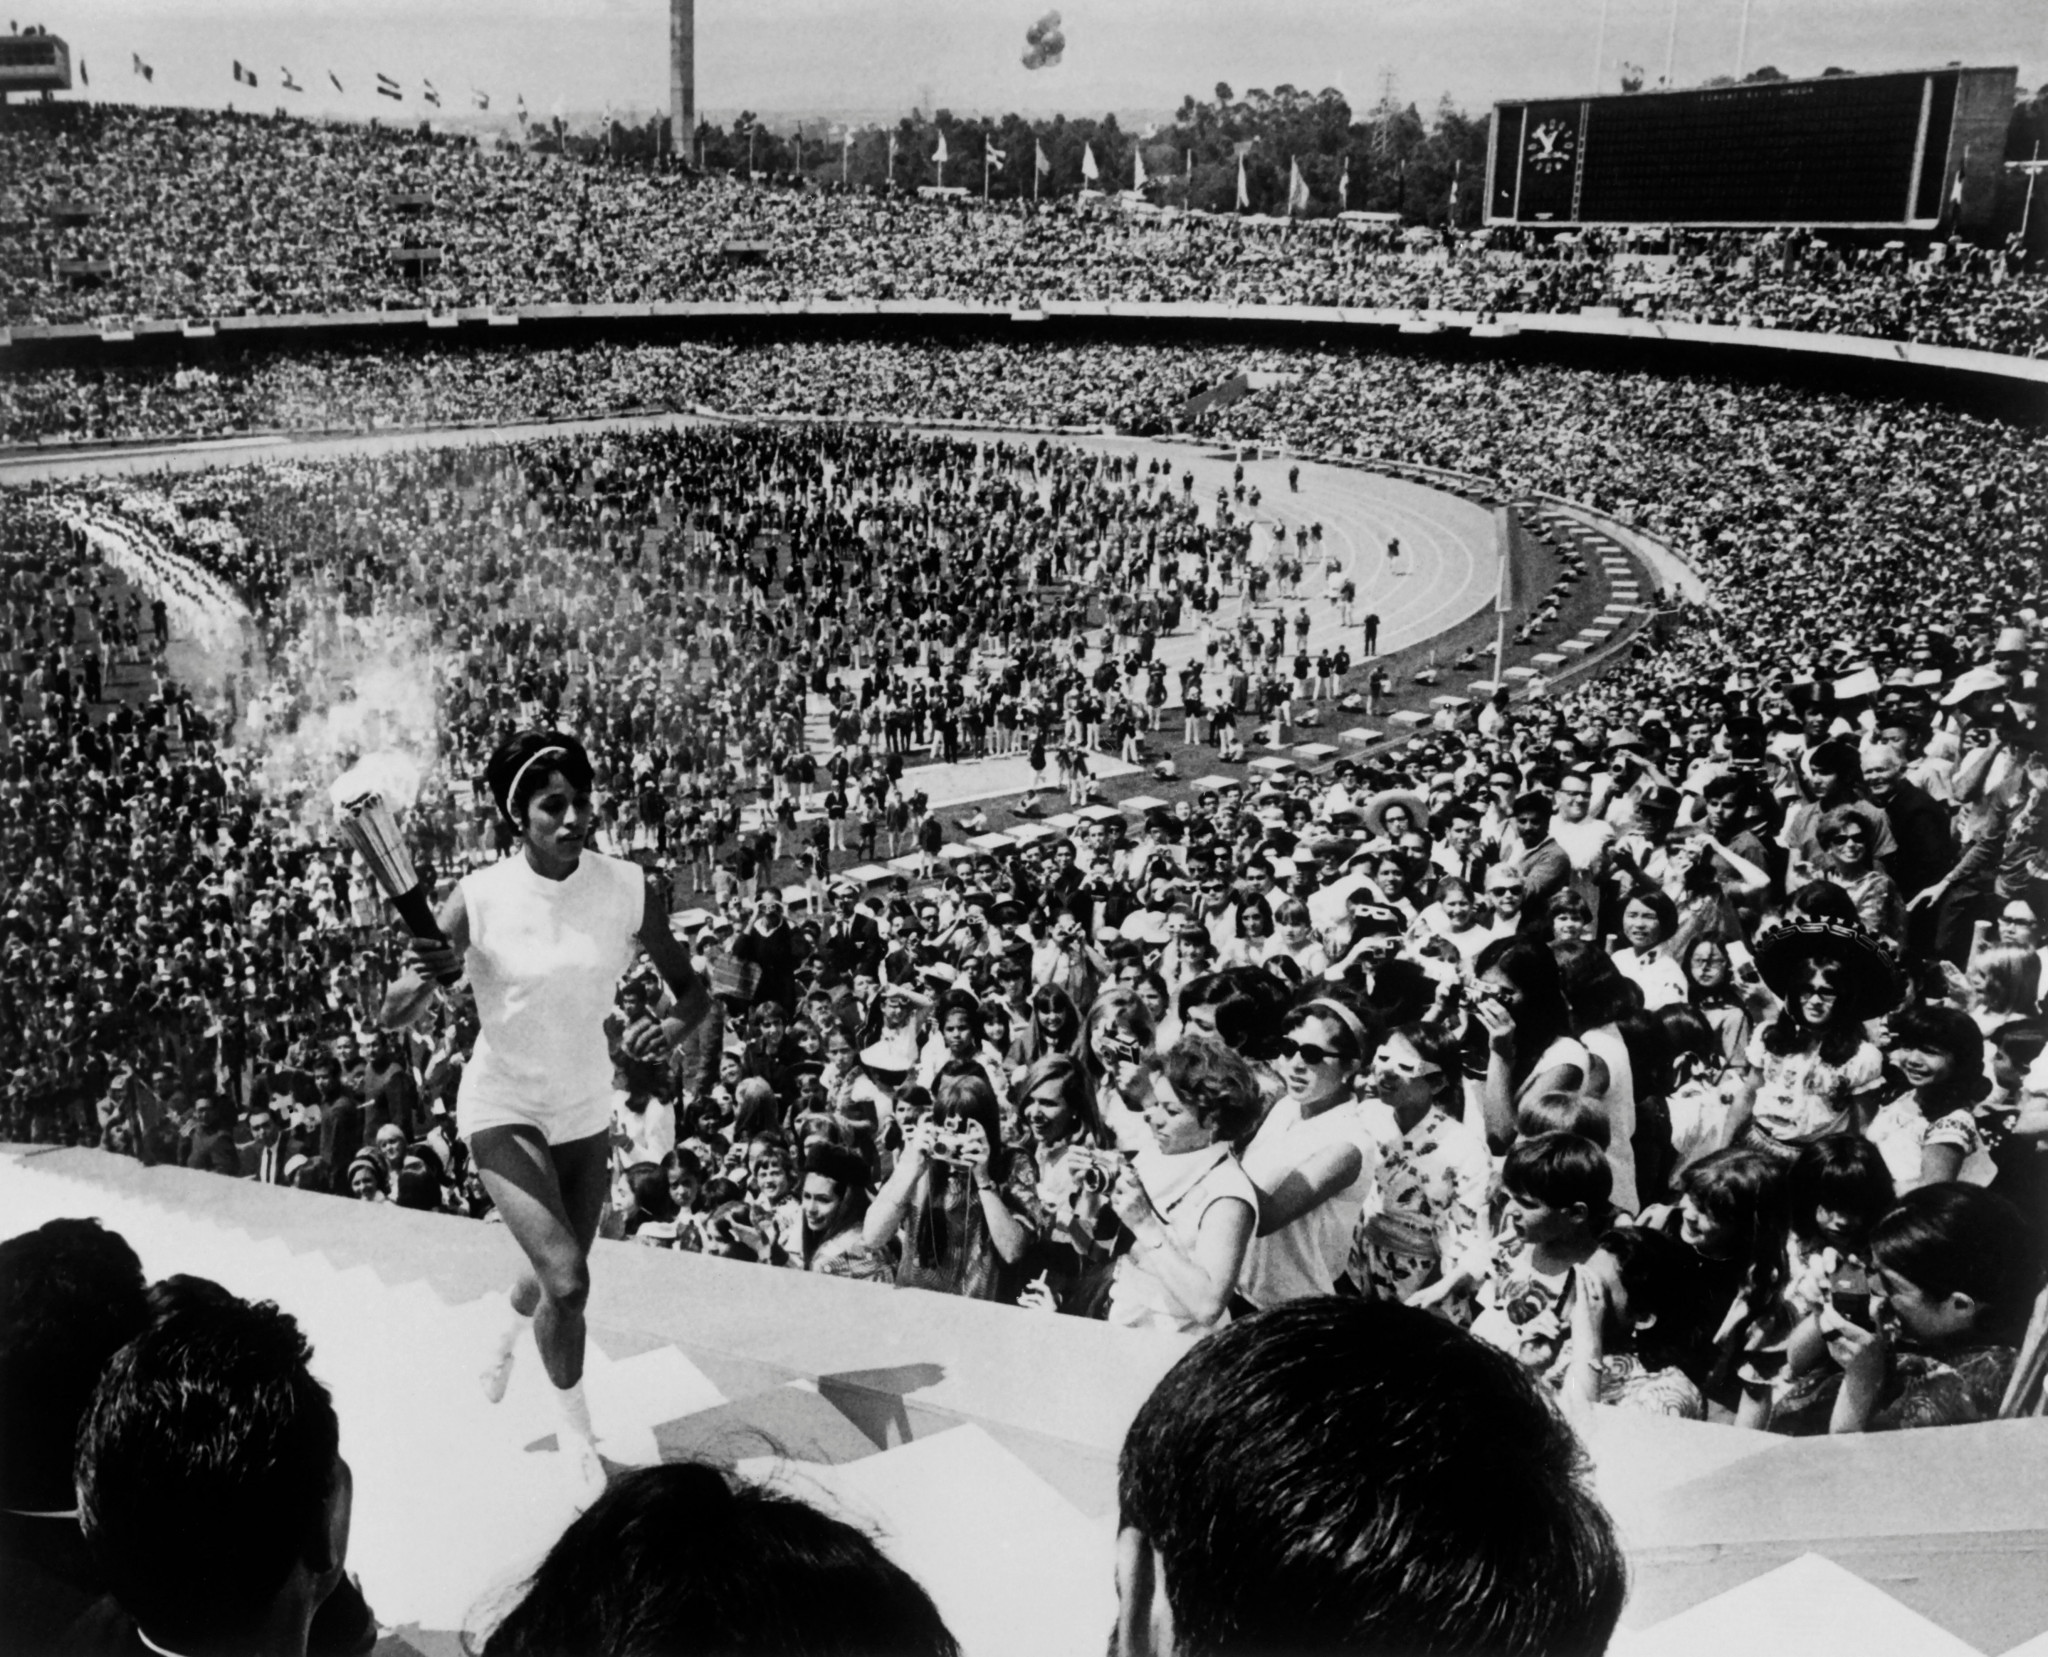 Norma Enriqueta Basilio makes history at Mexico City 1968 when she becomes the first woman to light the Olympic cauldron ©Getty Images